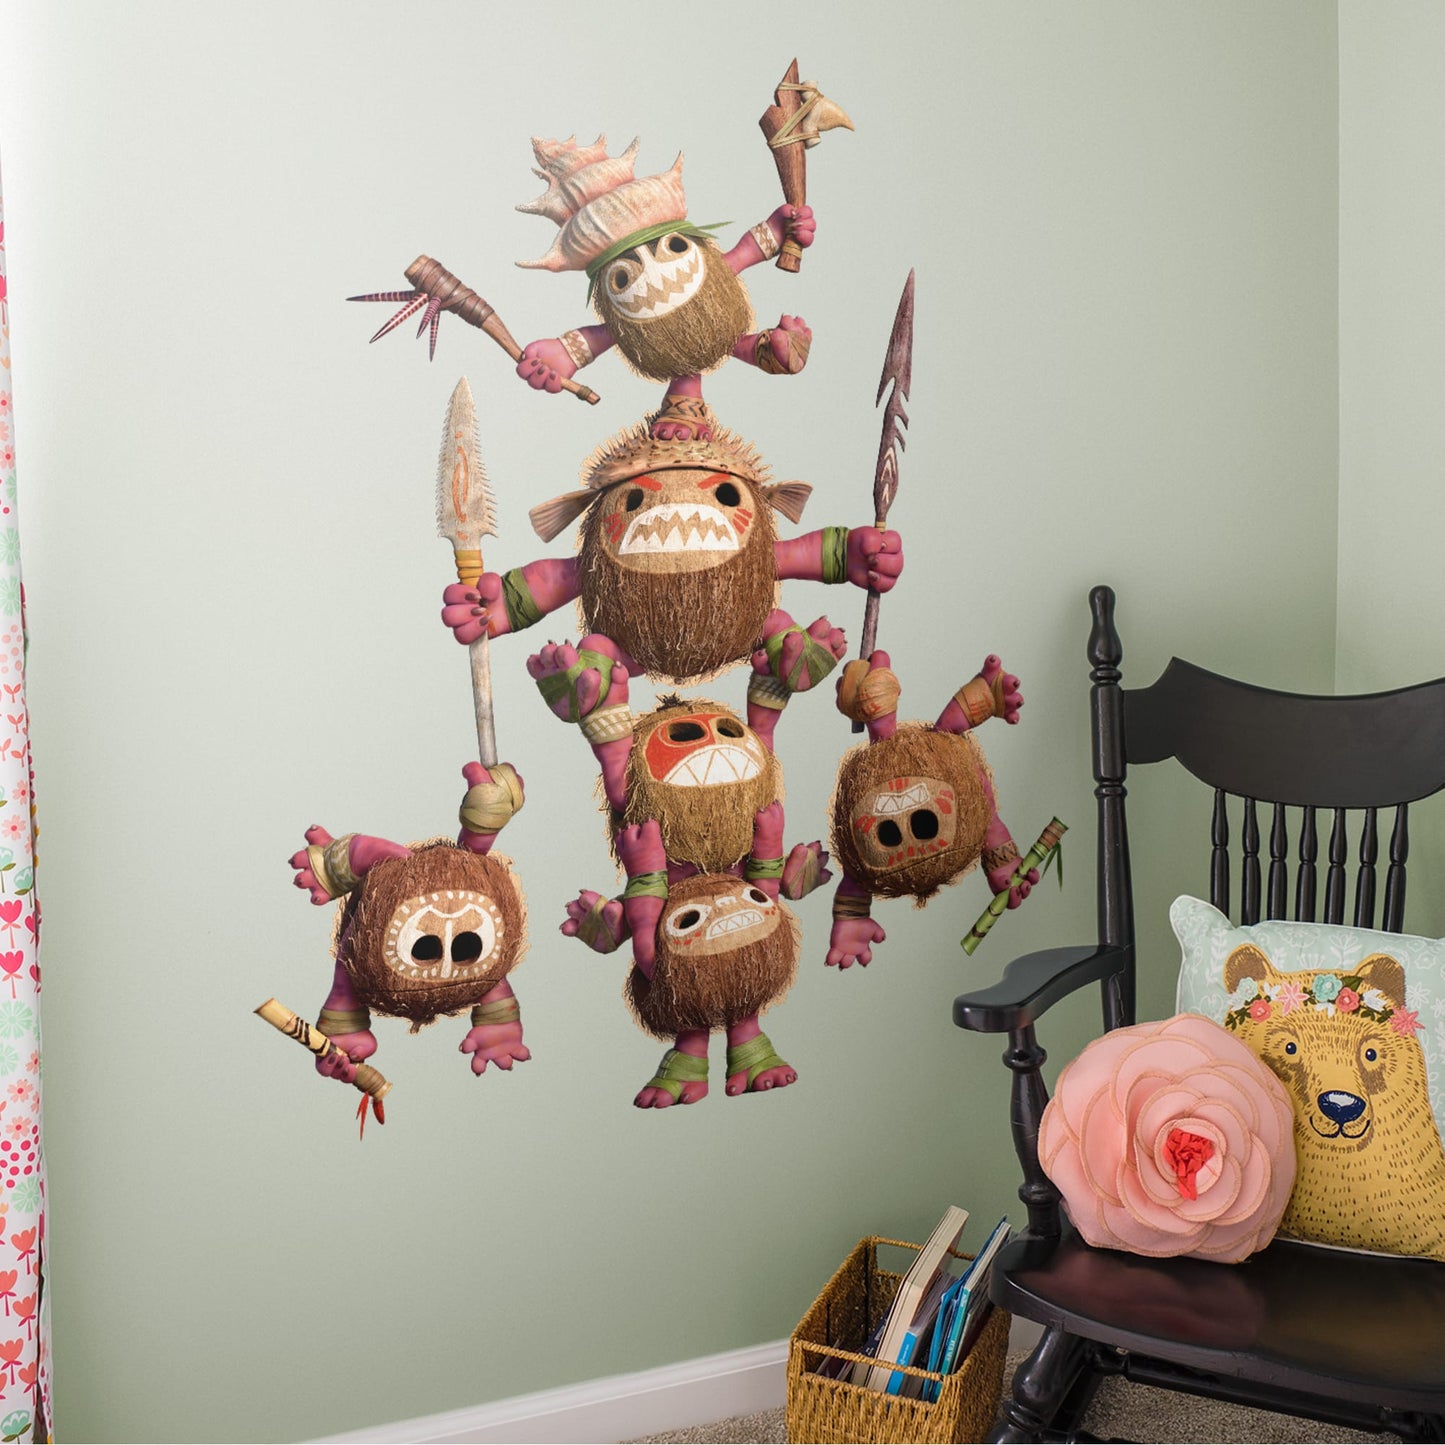 Moana: Kakamora Warriors - Officially Licensed Disney Removable Wall Decal